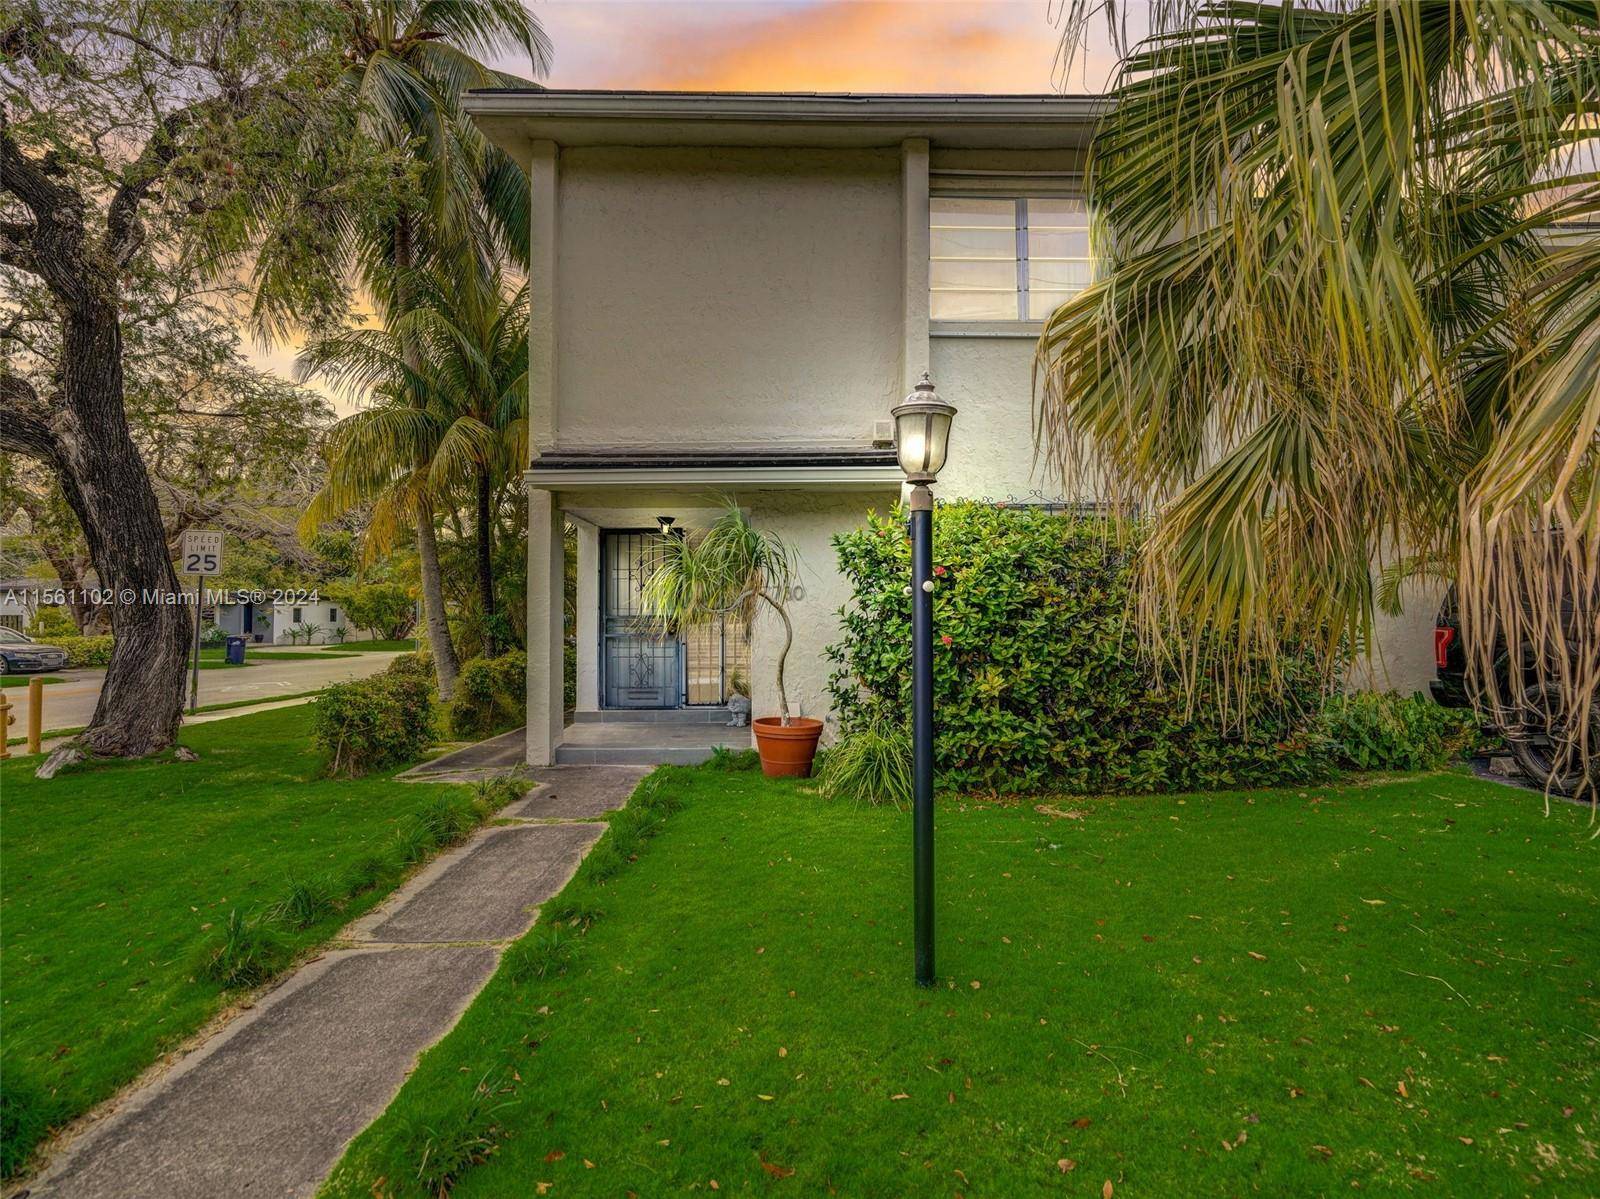 Introducing a charming corner lot townhome condo in South Miami.